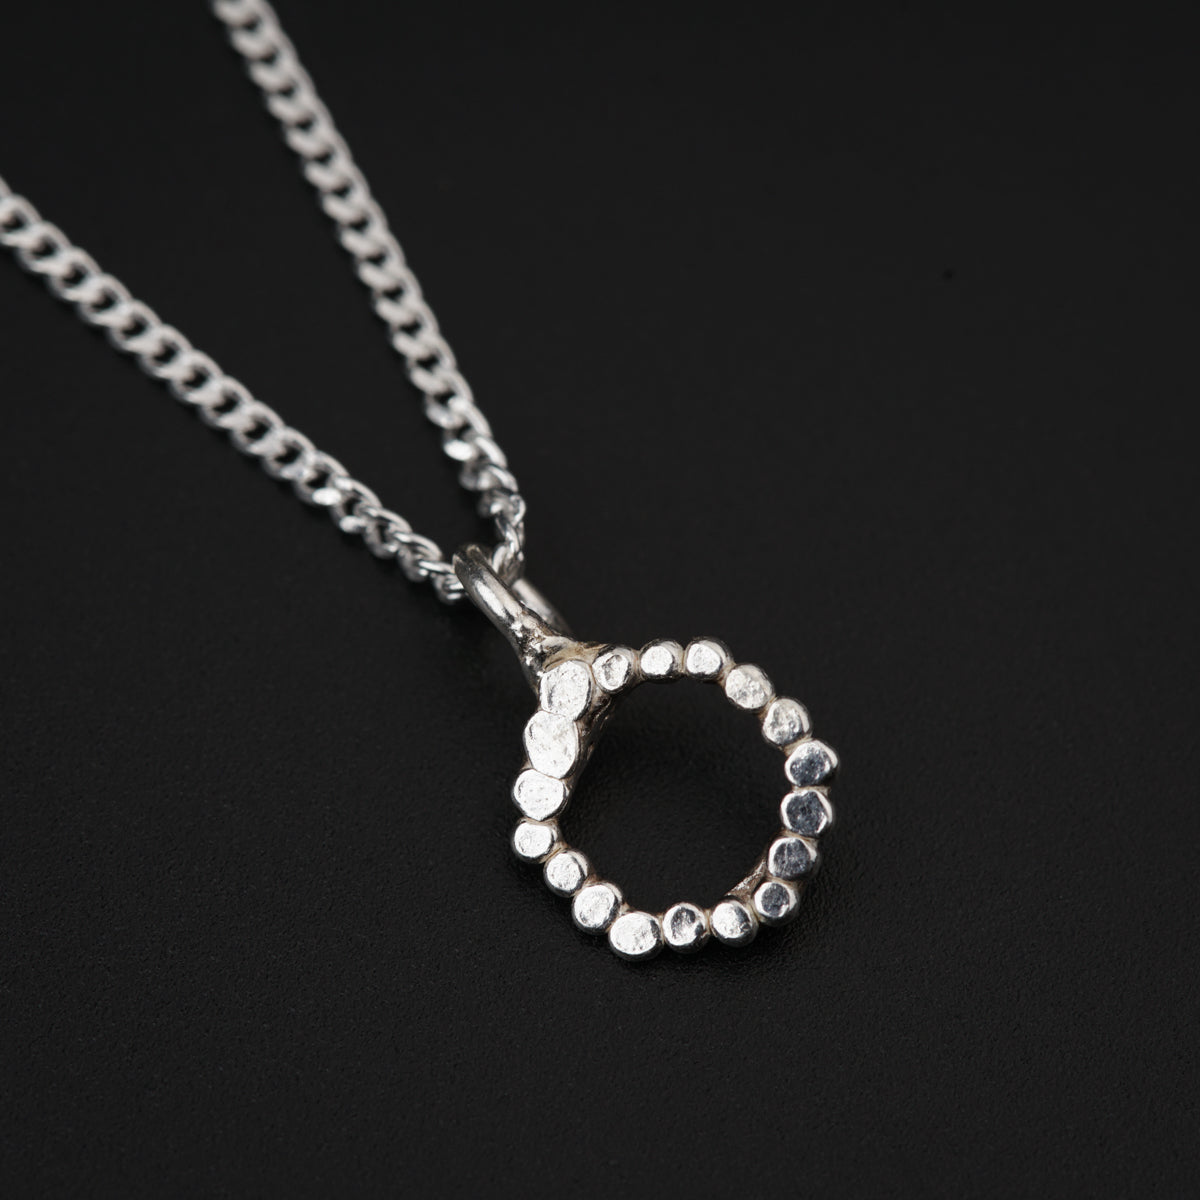 Daily Wear Silver Hammered Round Necklace